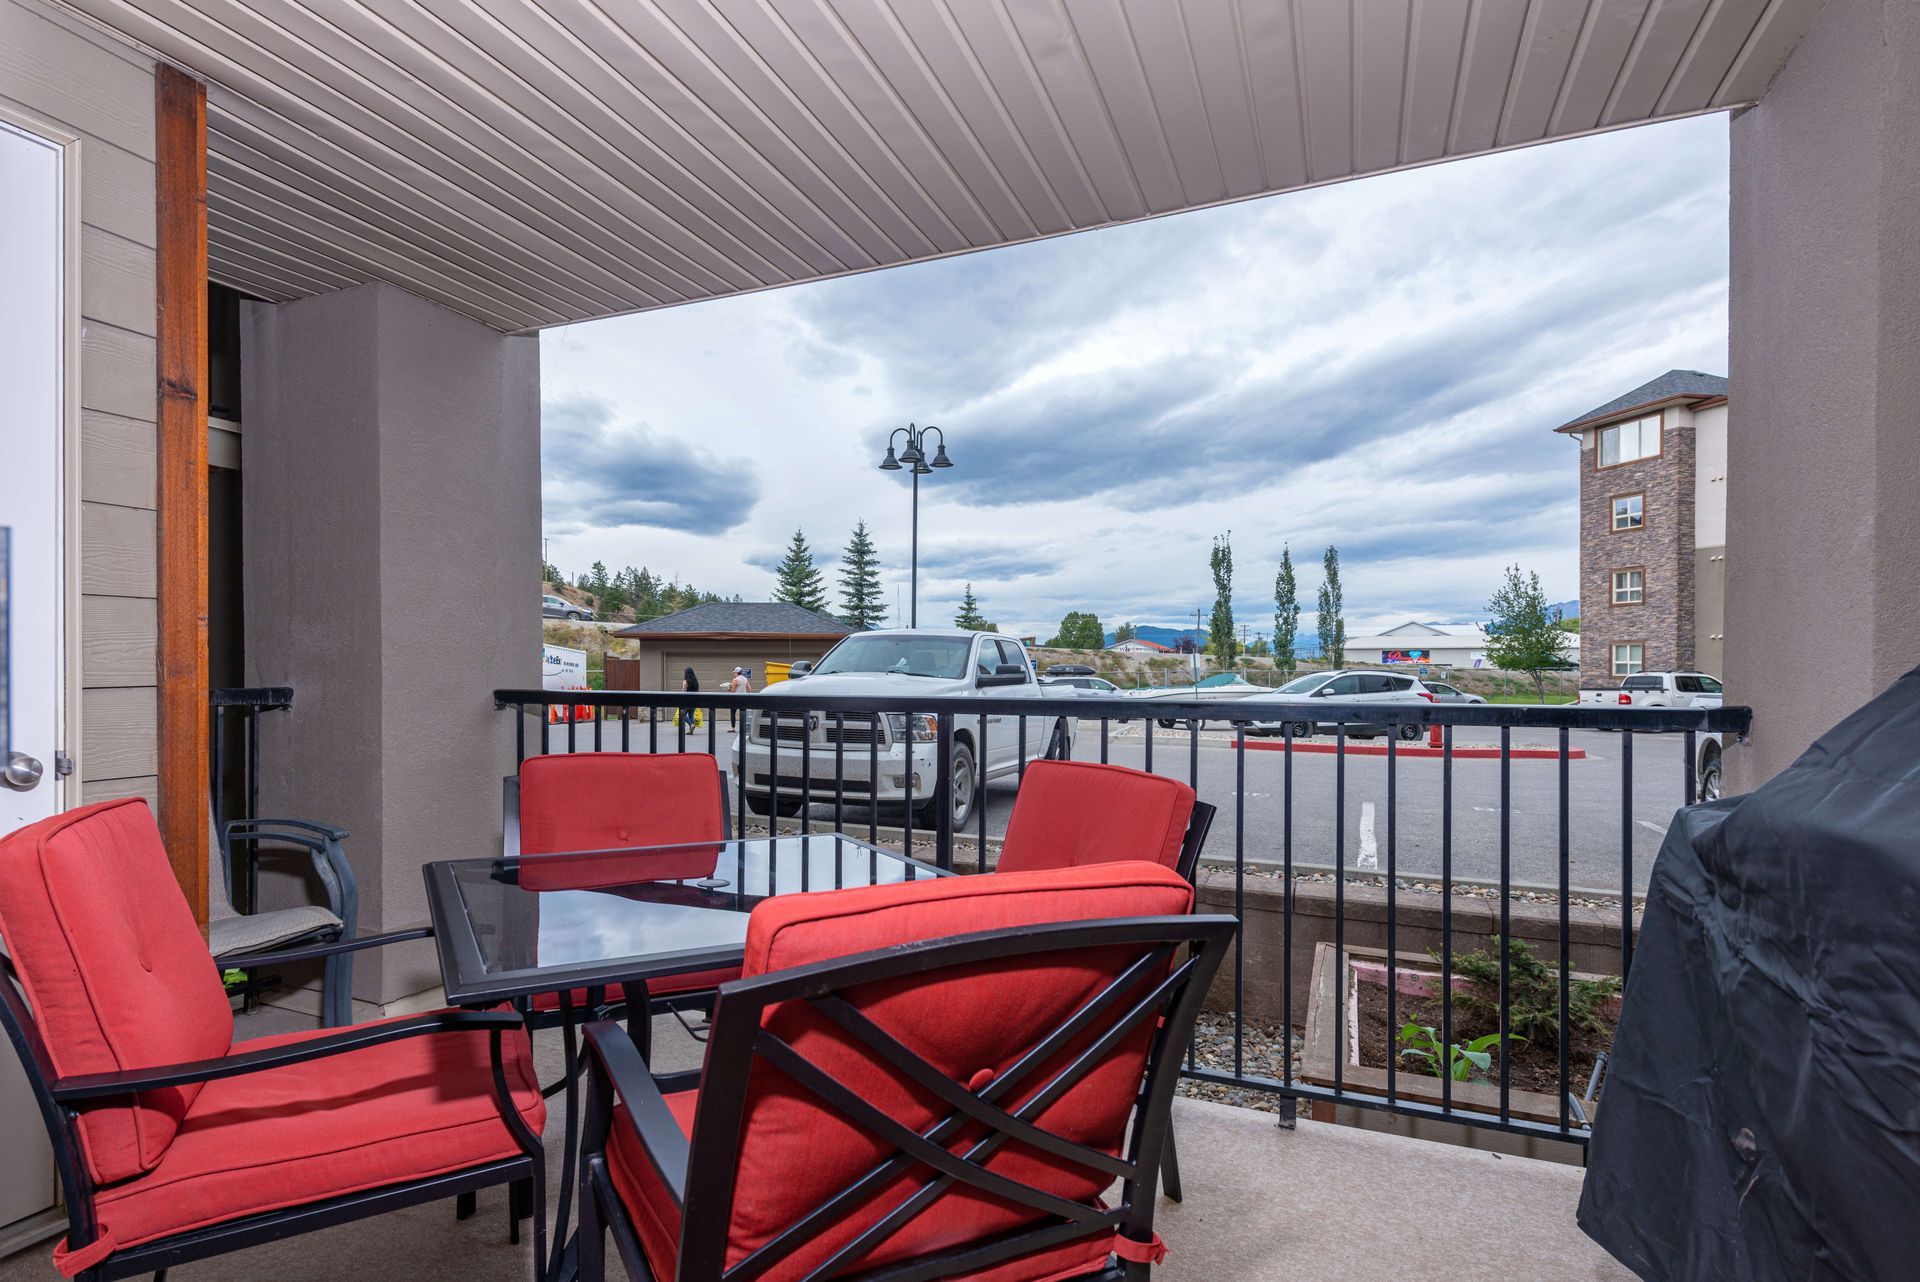 Patio at the Lake Windermere Pointe Condos in Invermere, BC managed by Aisling Baile Property Management